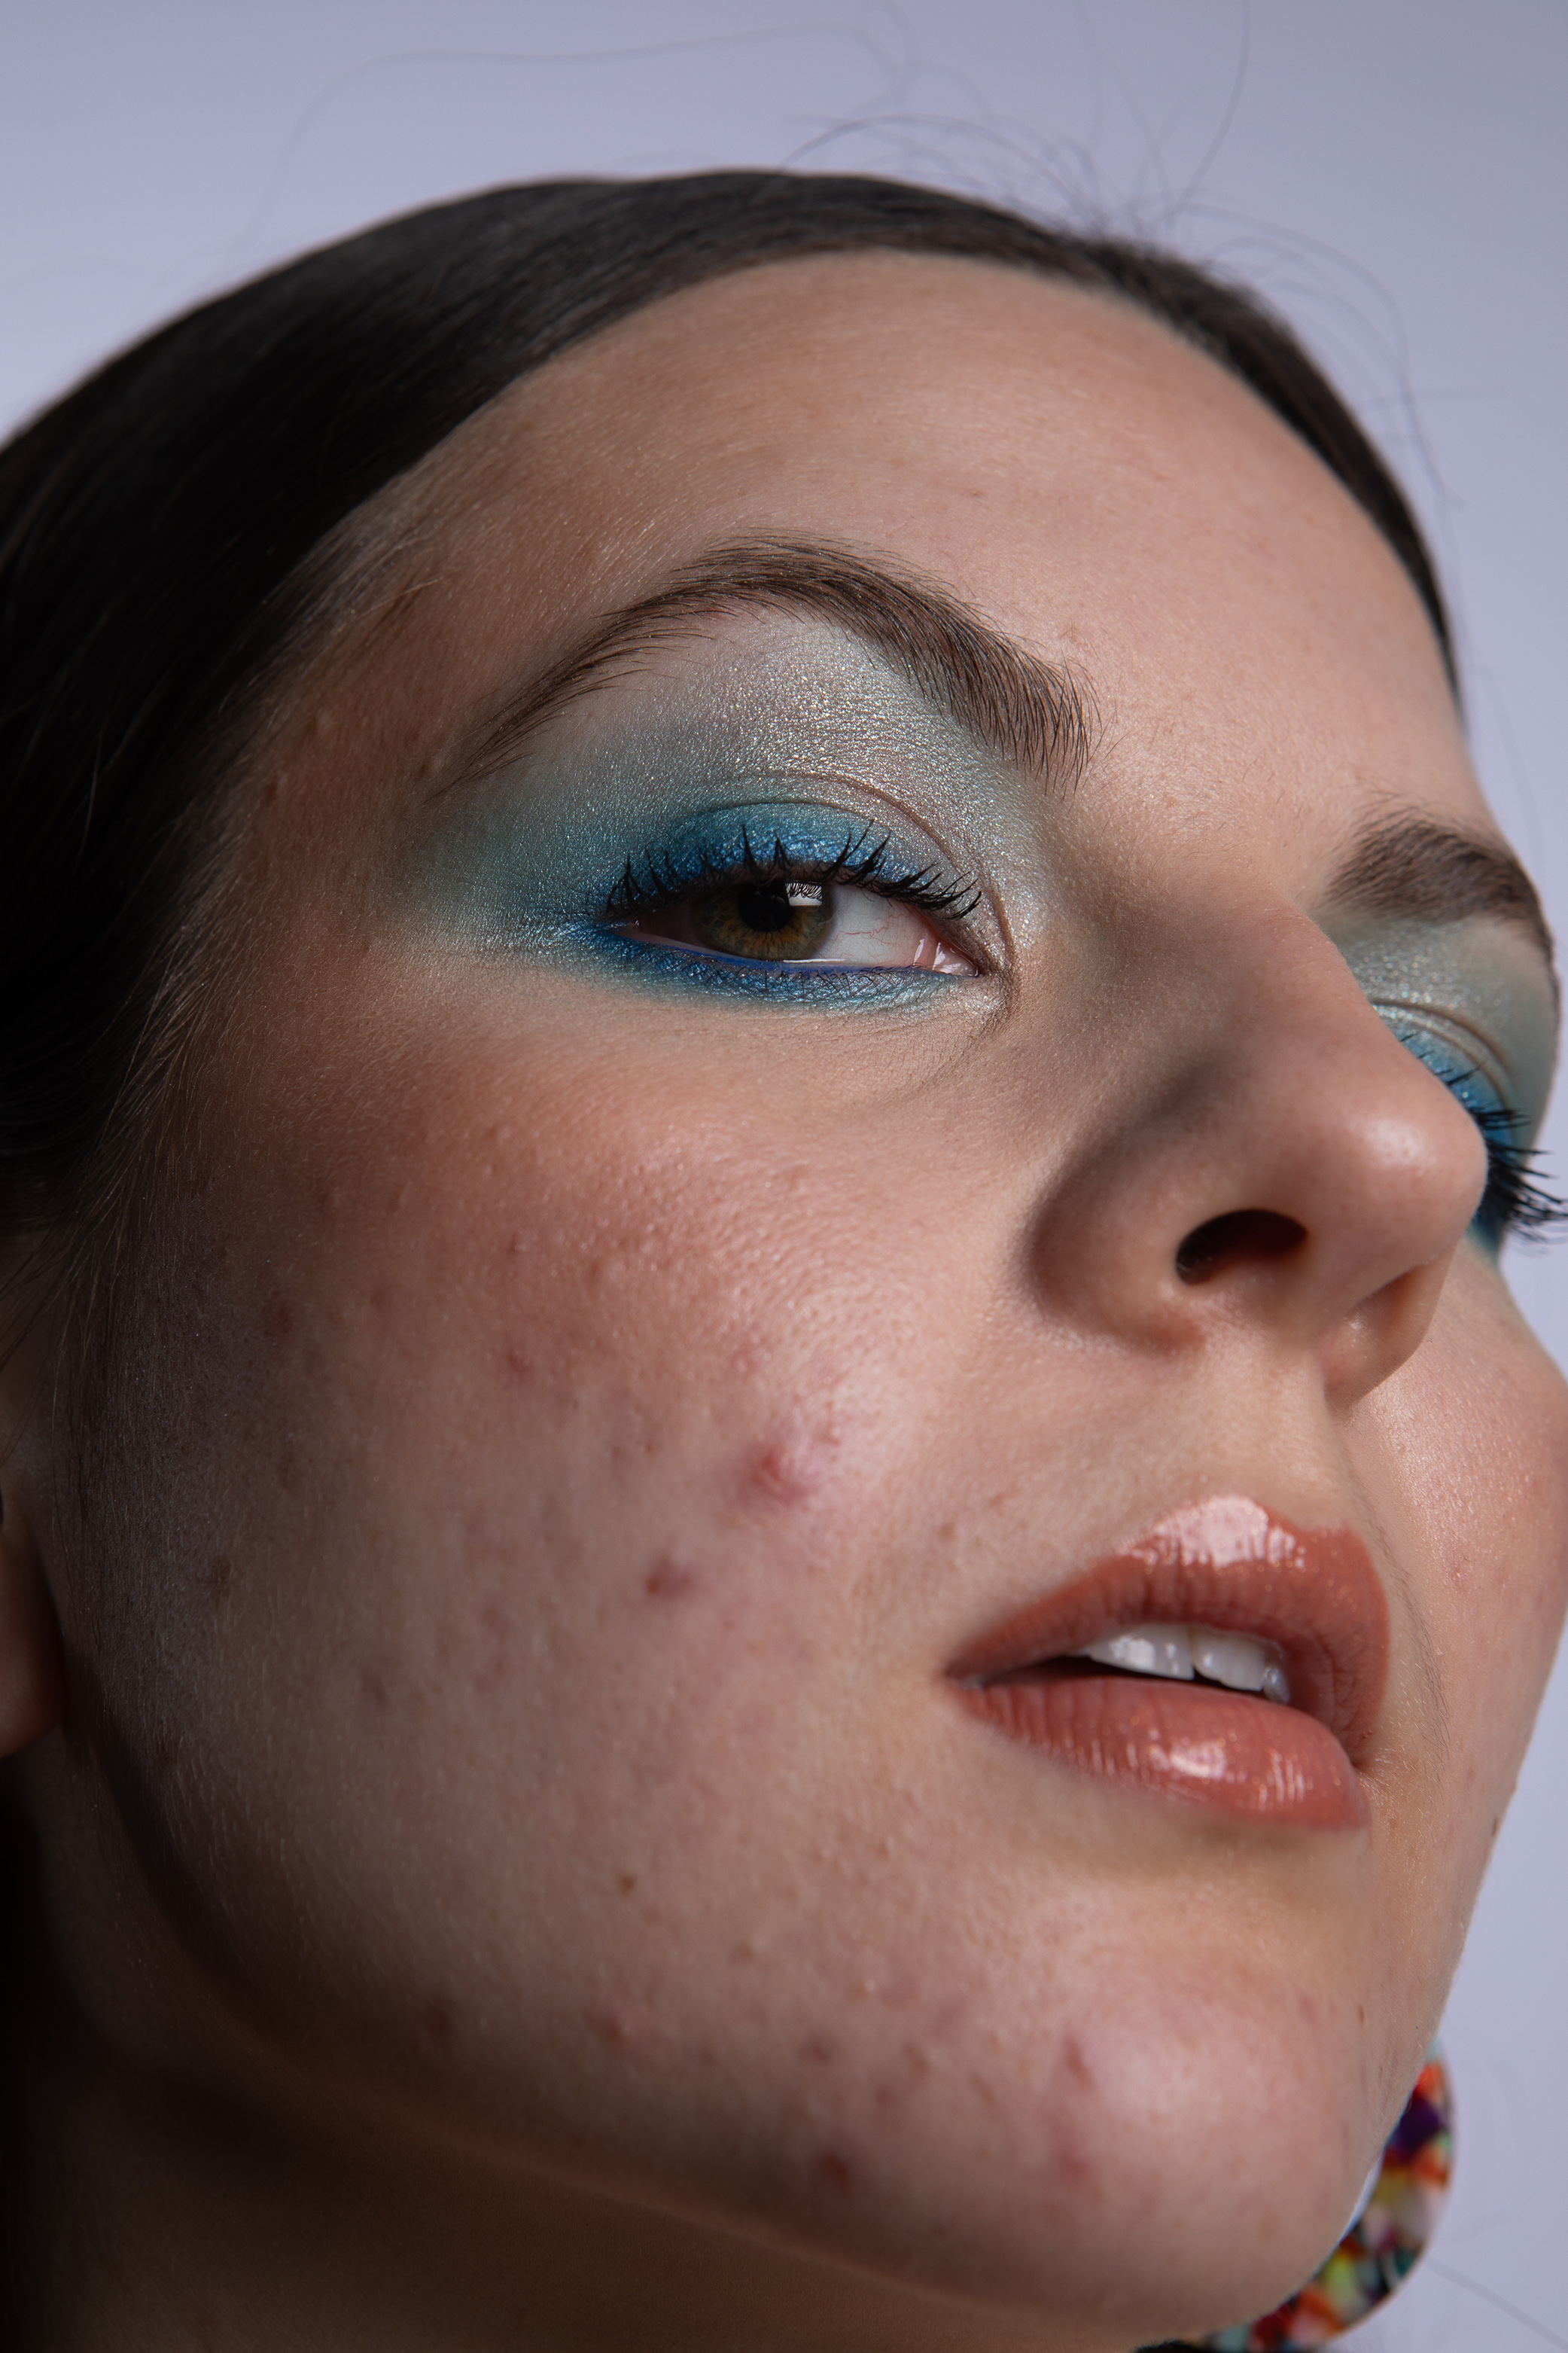 BA Photography work by Beth Unsworth showing an image of a brunette woman with acne.